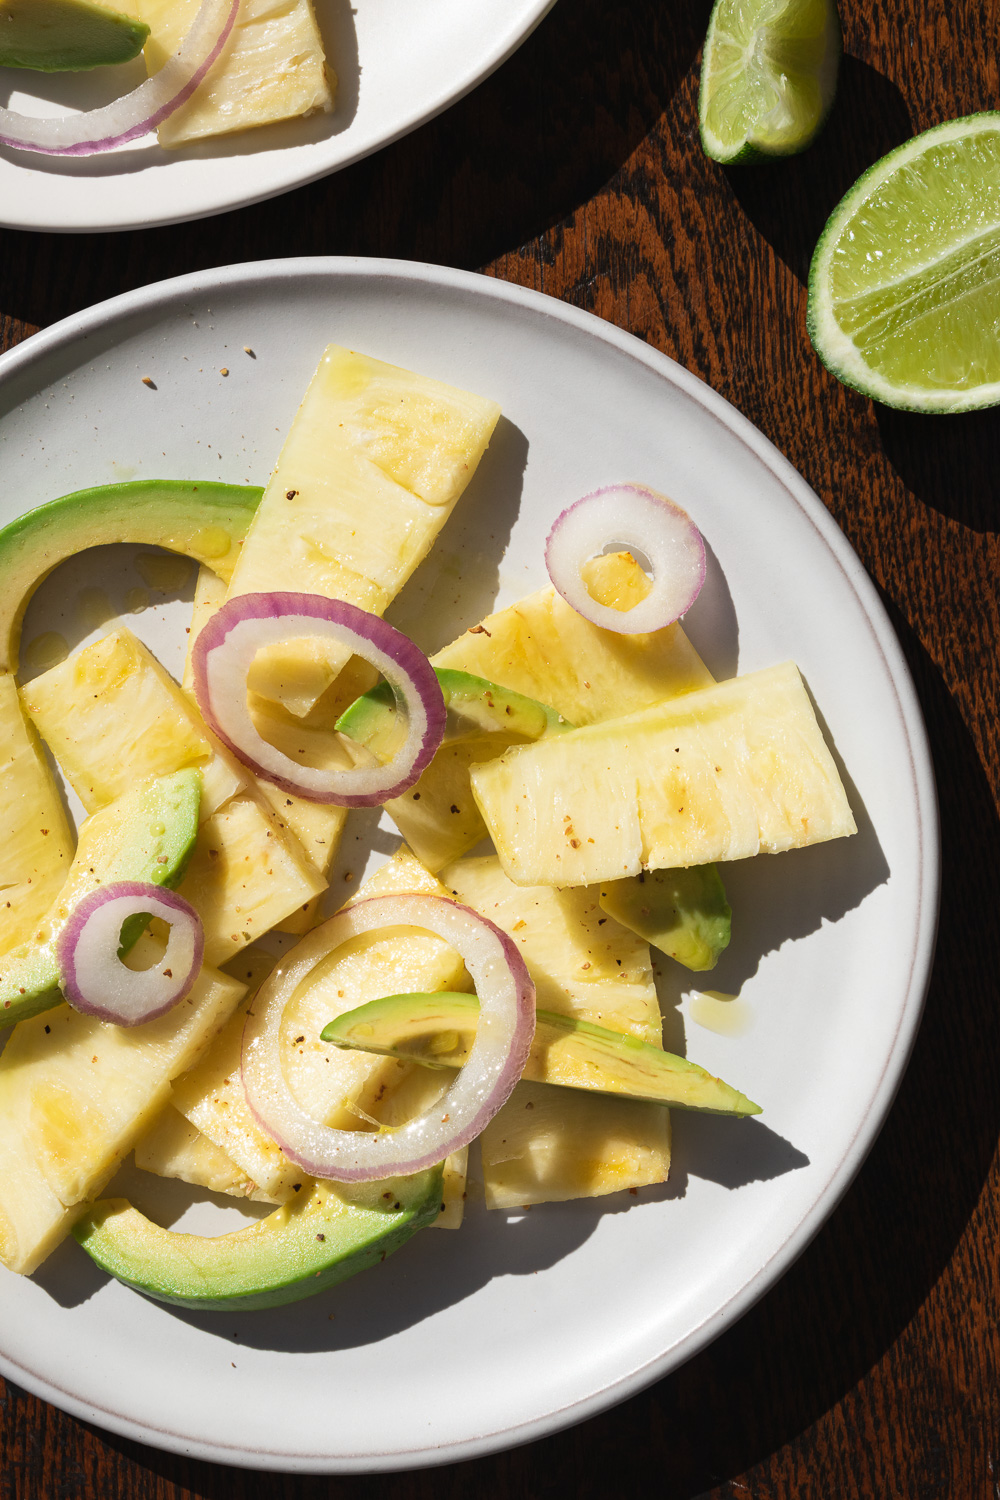 pineapple, avocado, and red onion salad on white plates on a wooden table with lime slices